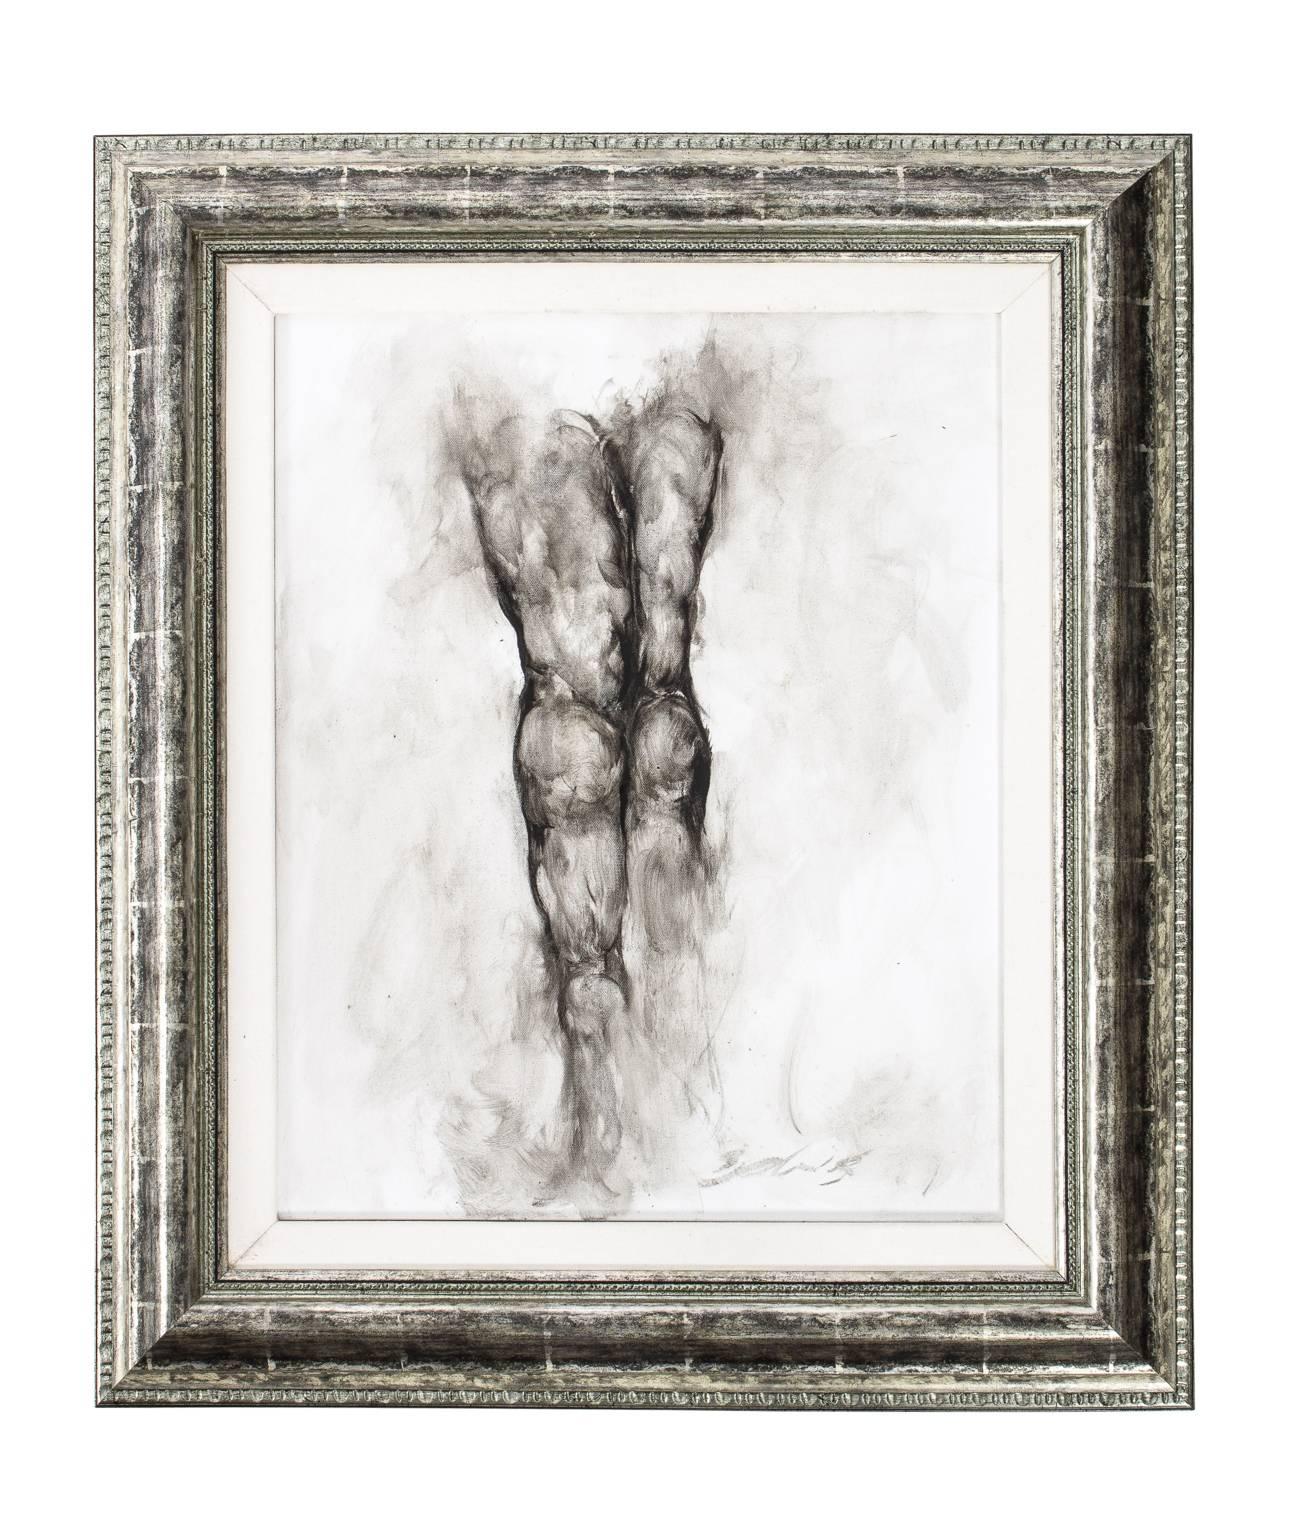 Pair of male nude drawings by Ed Eller, charcoal on canvas. Framed and matted in silvered wood frames. Signed Ed Eller.